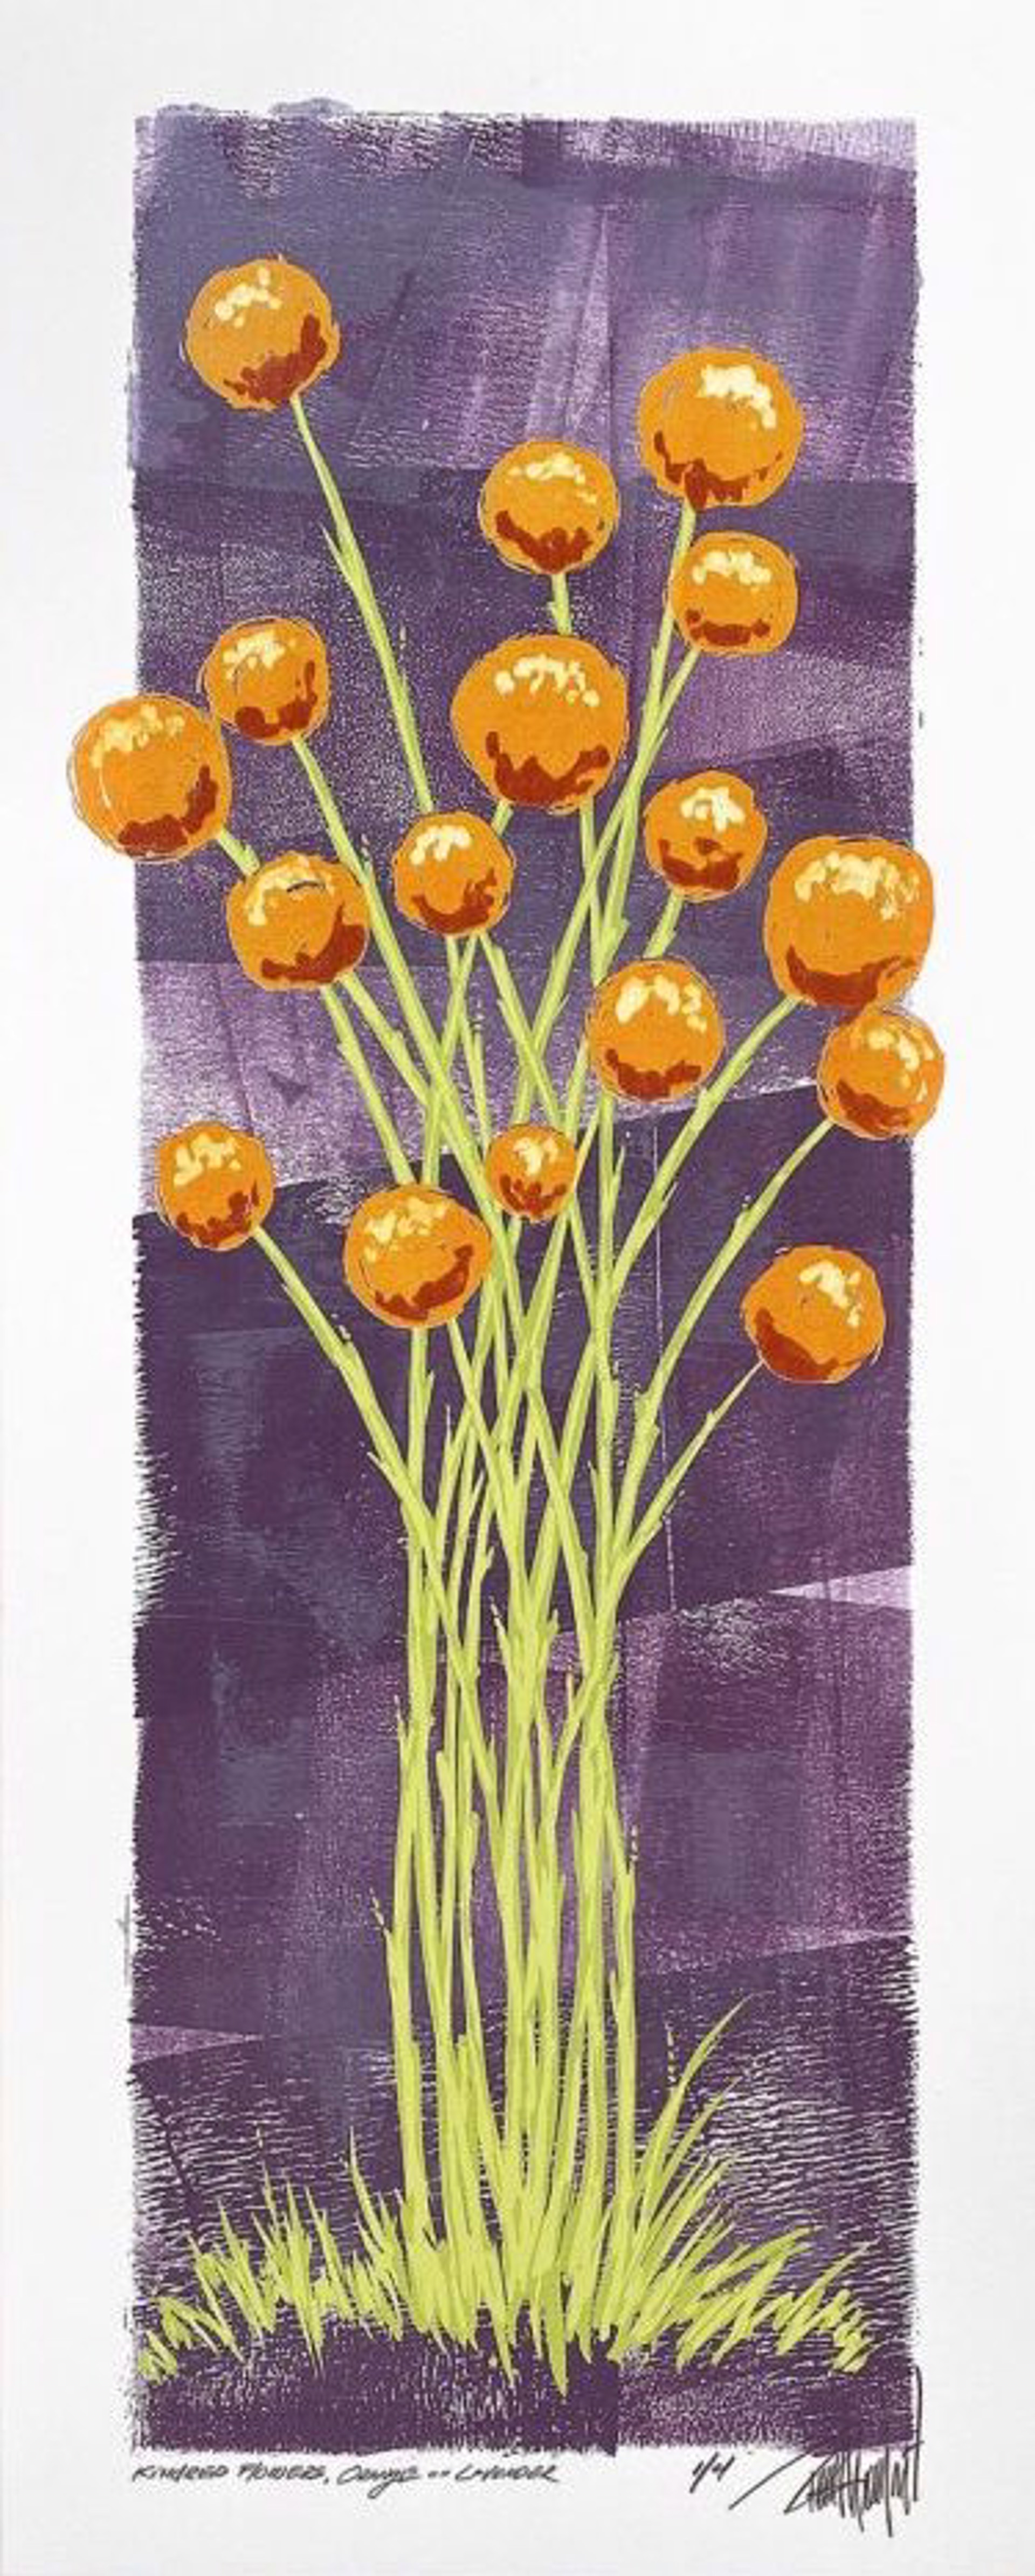 Kindred Flowers, Orange on Lavender by Terrell Thornhill